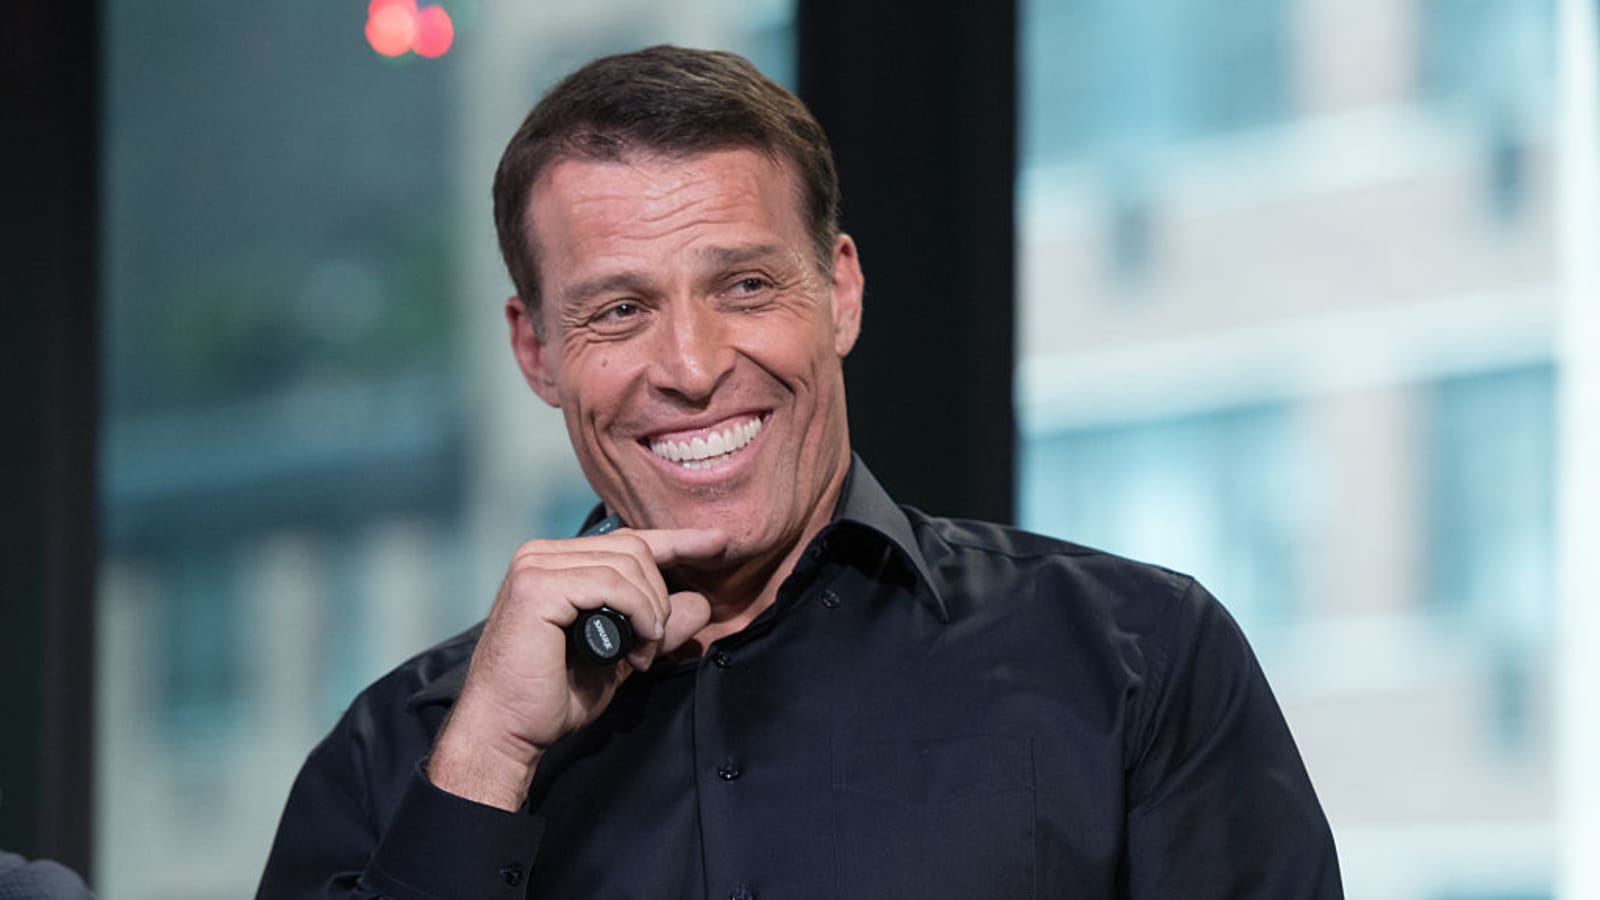 Tony Robbins Shares The Advice He Would Give His Year Old Self